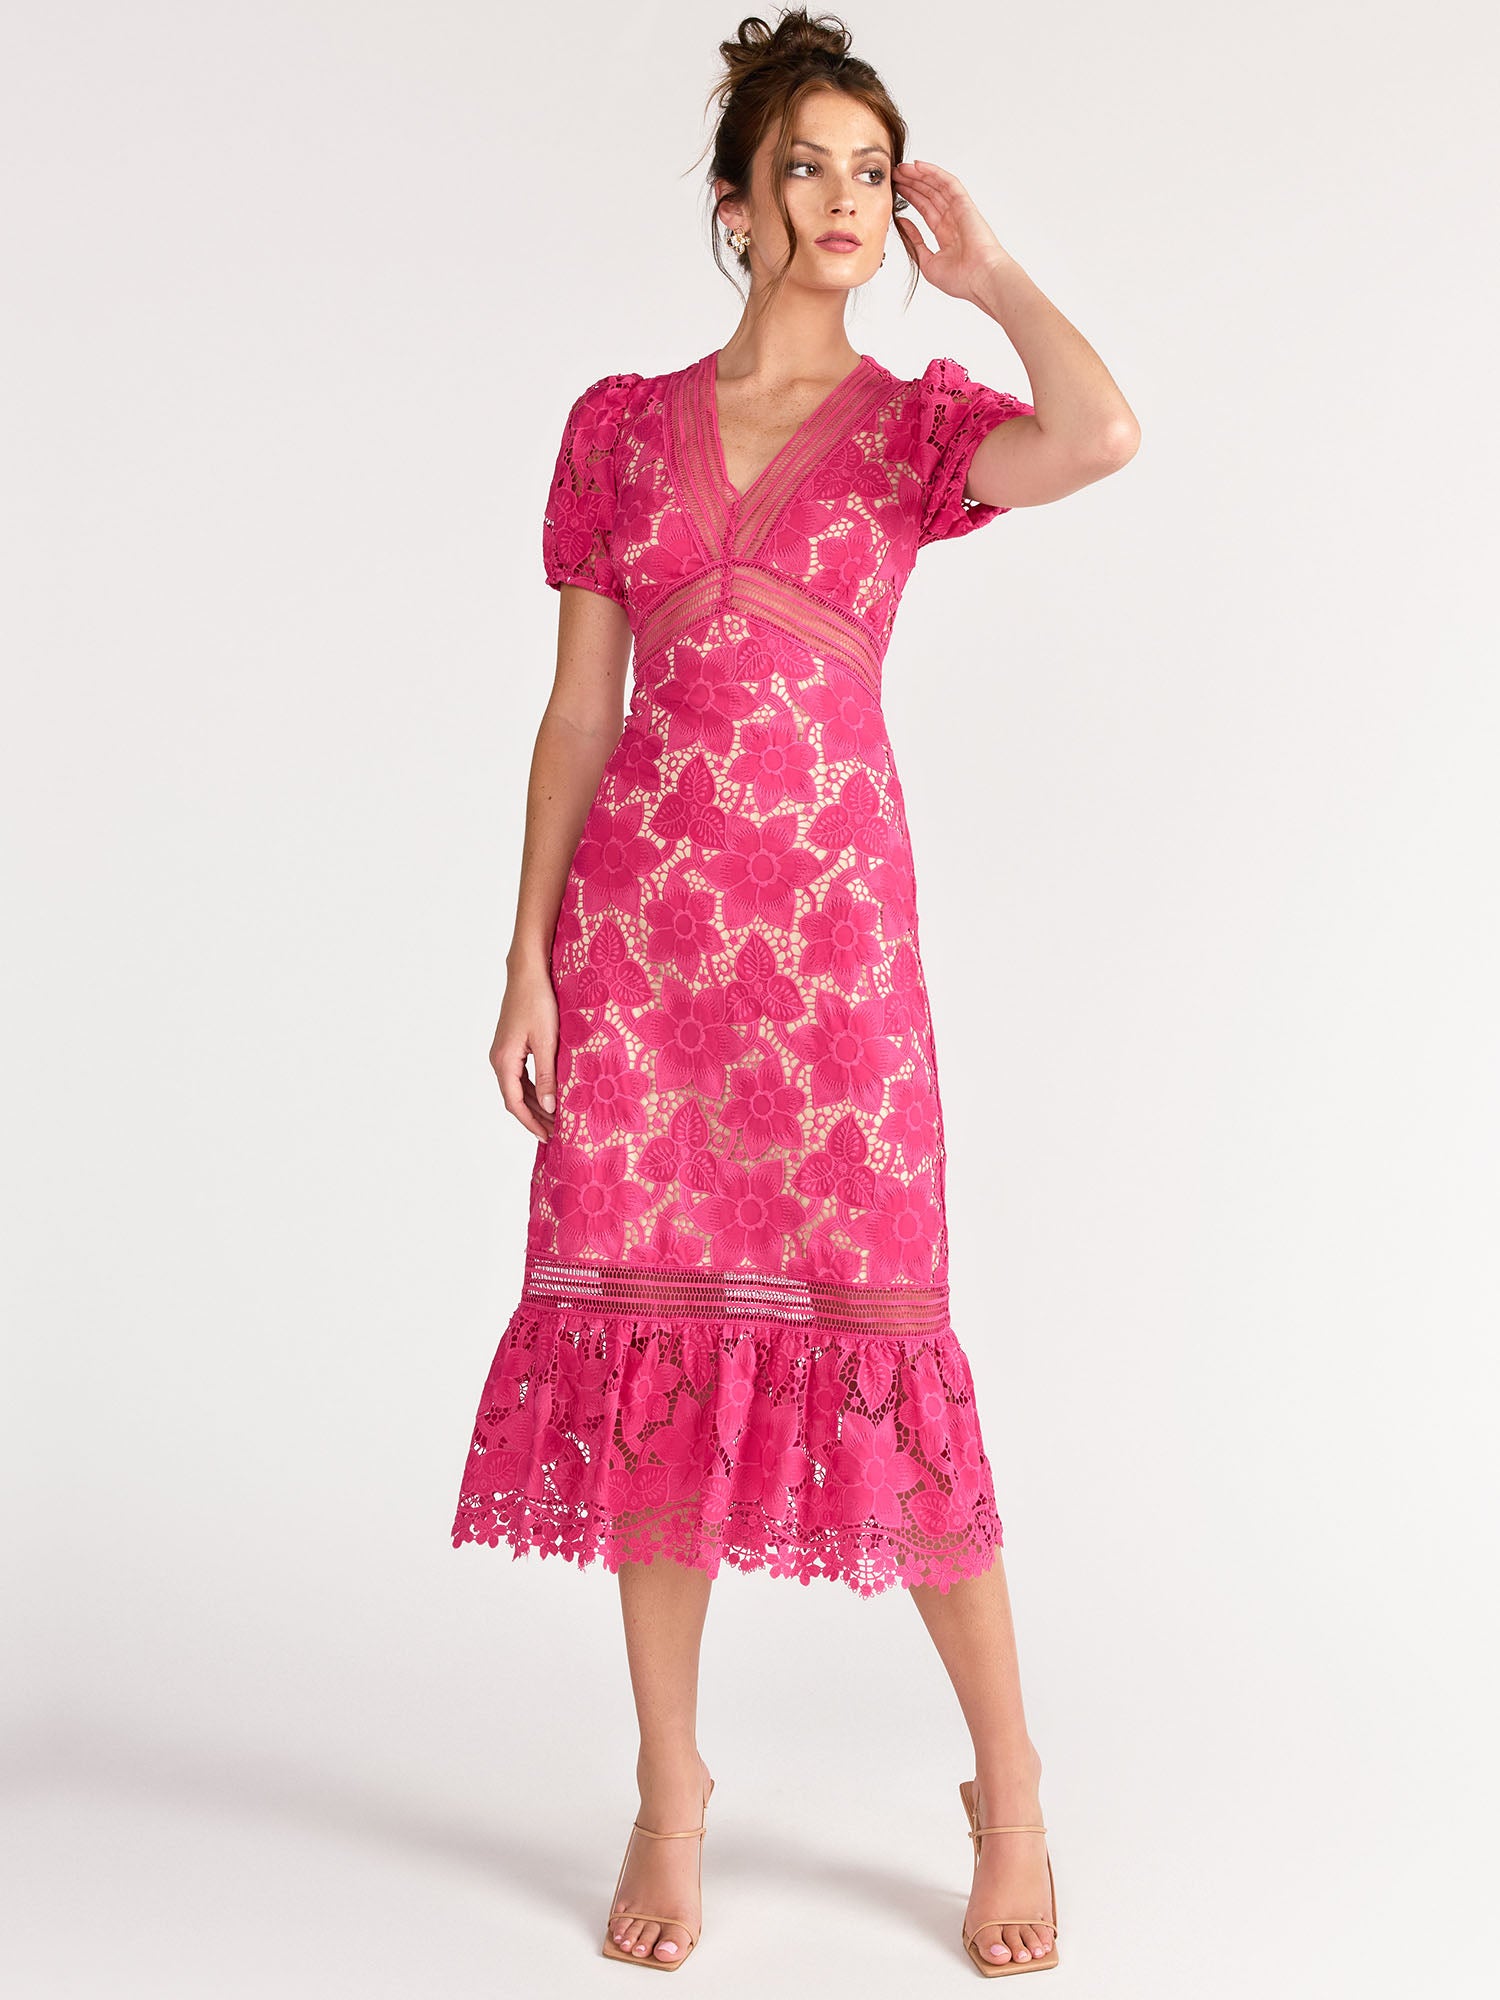 Just Me Floral Puff Sleeves Ruffle Mesh Lace Dress - Brands We Love | NY&Co